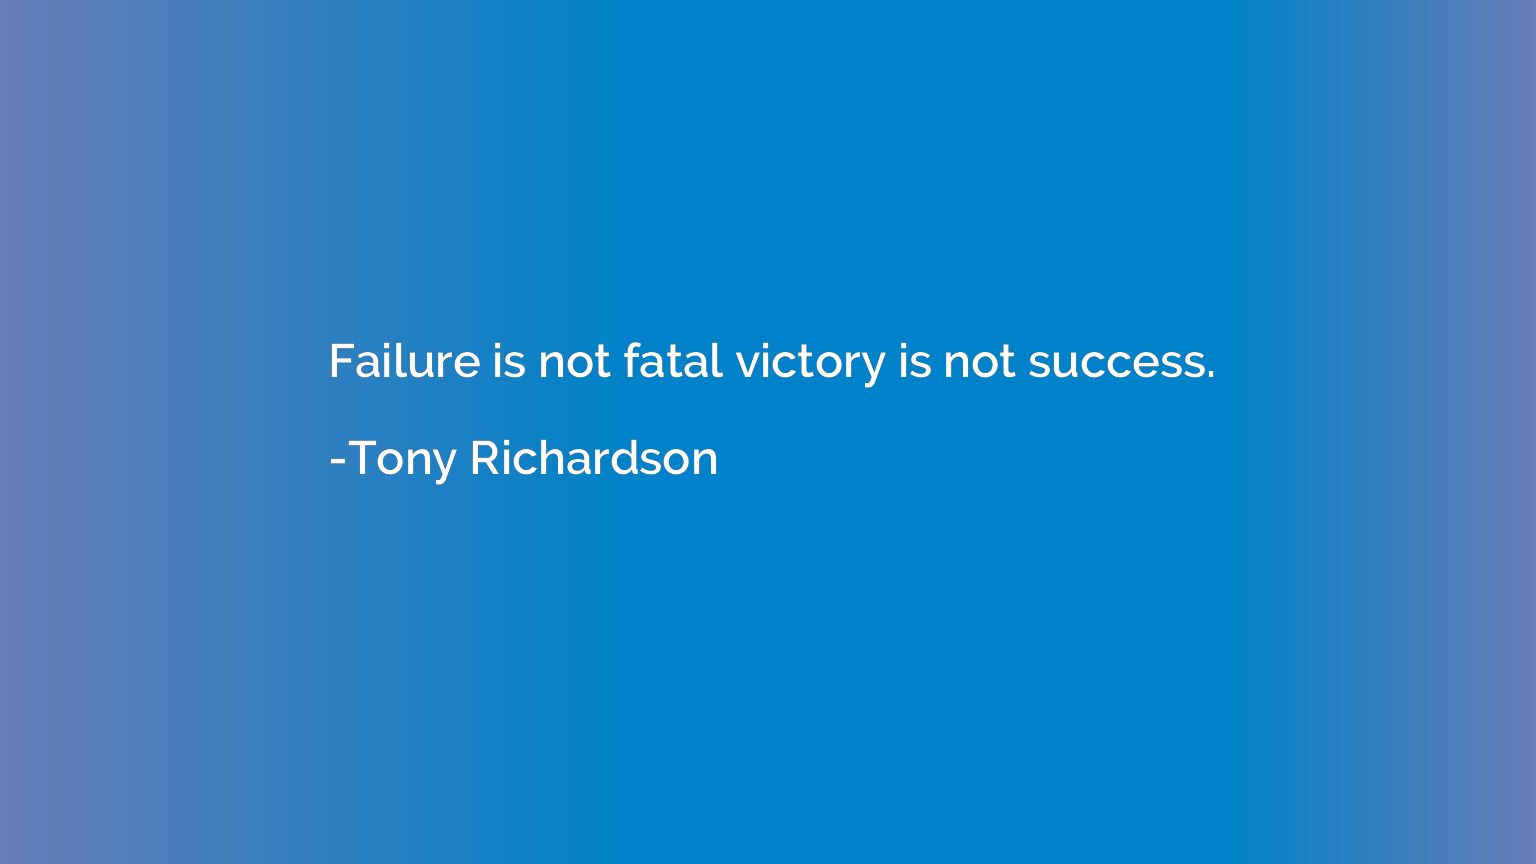 Failure is not fatal victory is not success.